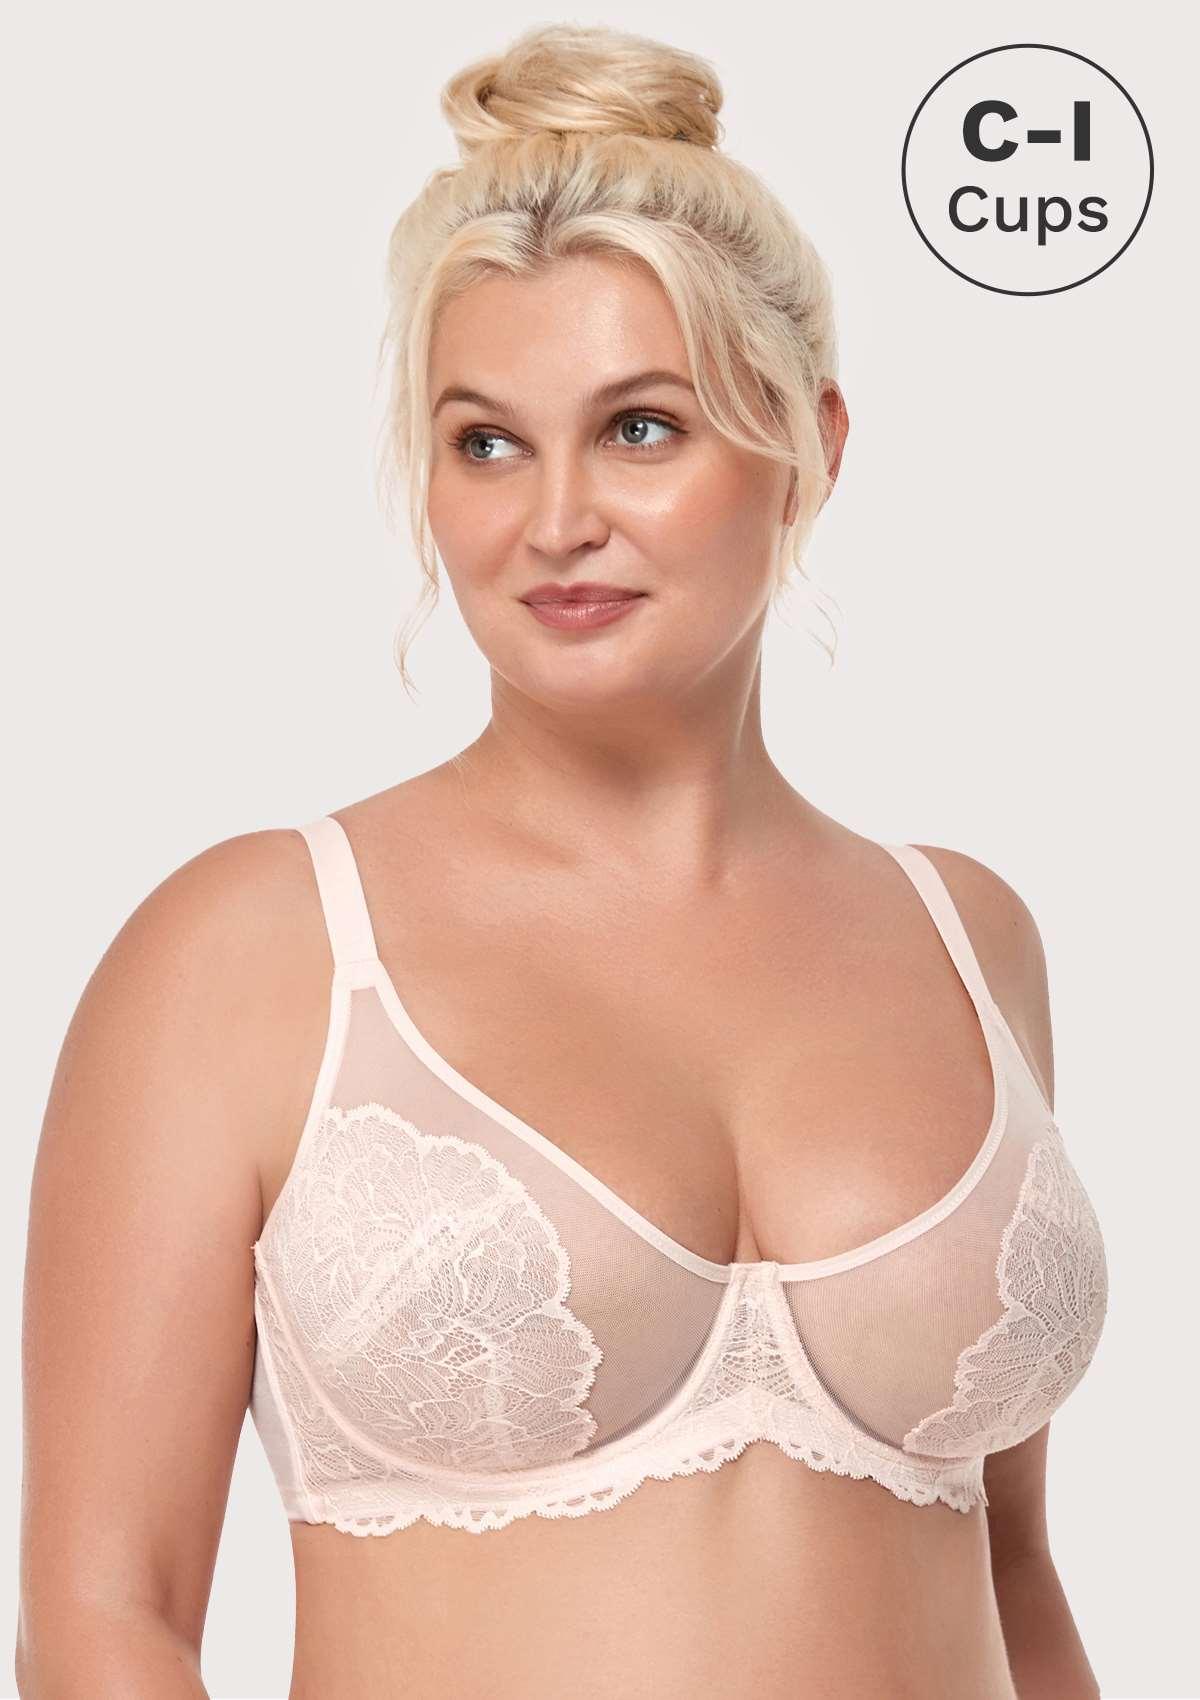 HSIA Blossom Matching Lacey Underwear And Bra Set: Sexy Lace Bra - Dusty Peach / 42 / H